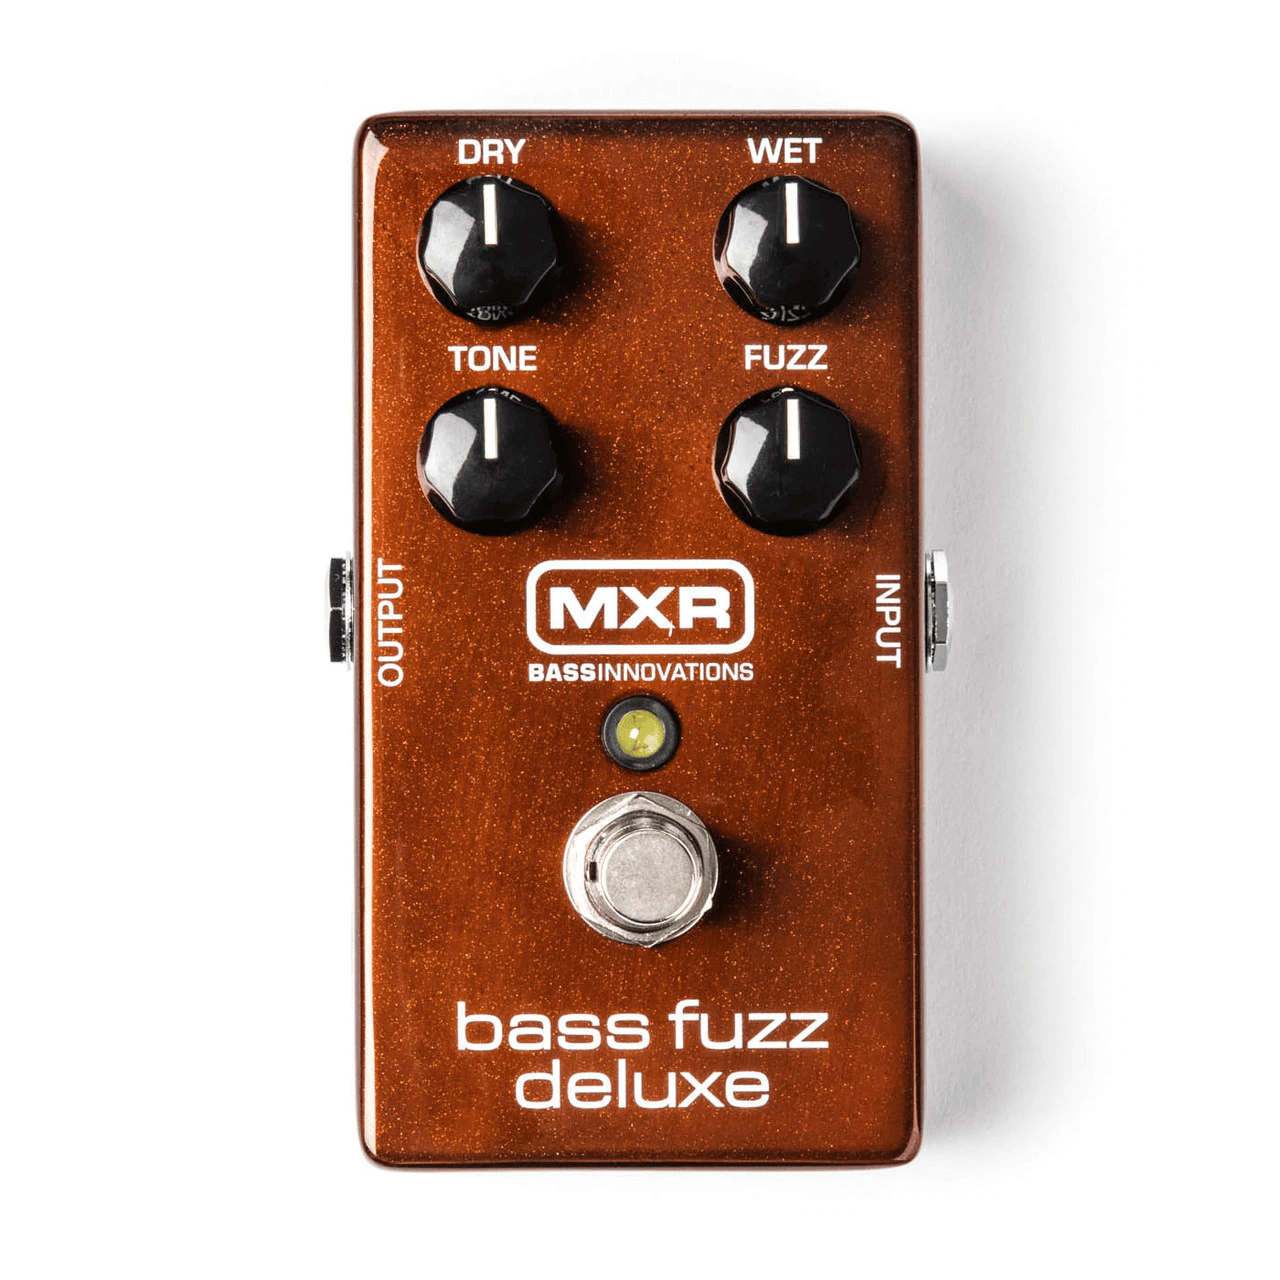 Bass Fuzz Deluxe - Bass - Effects Pedals by MXR at Muso's Stuff